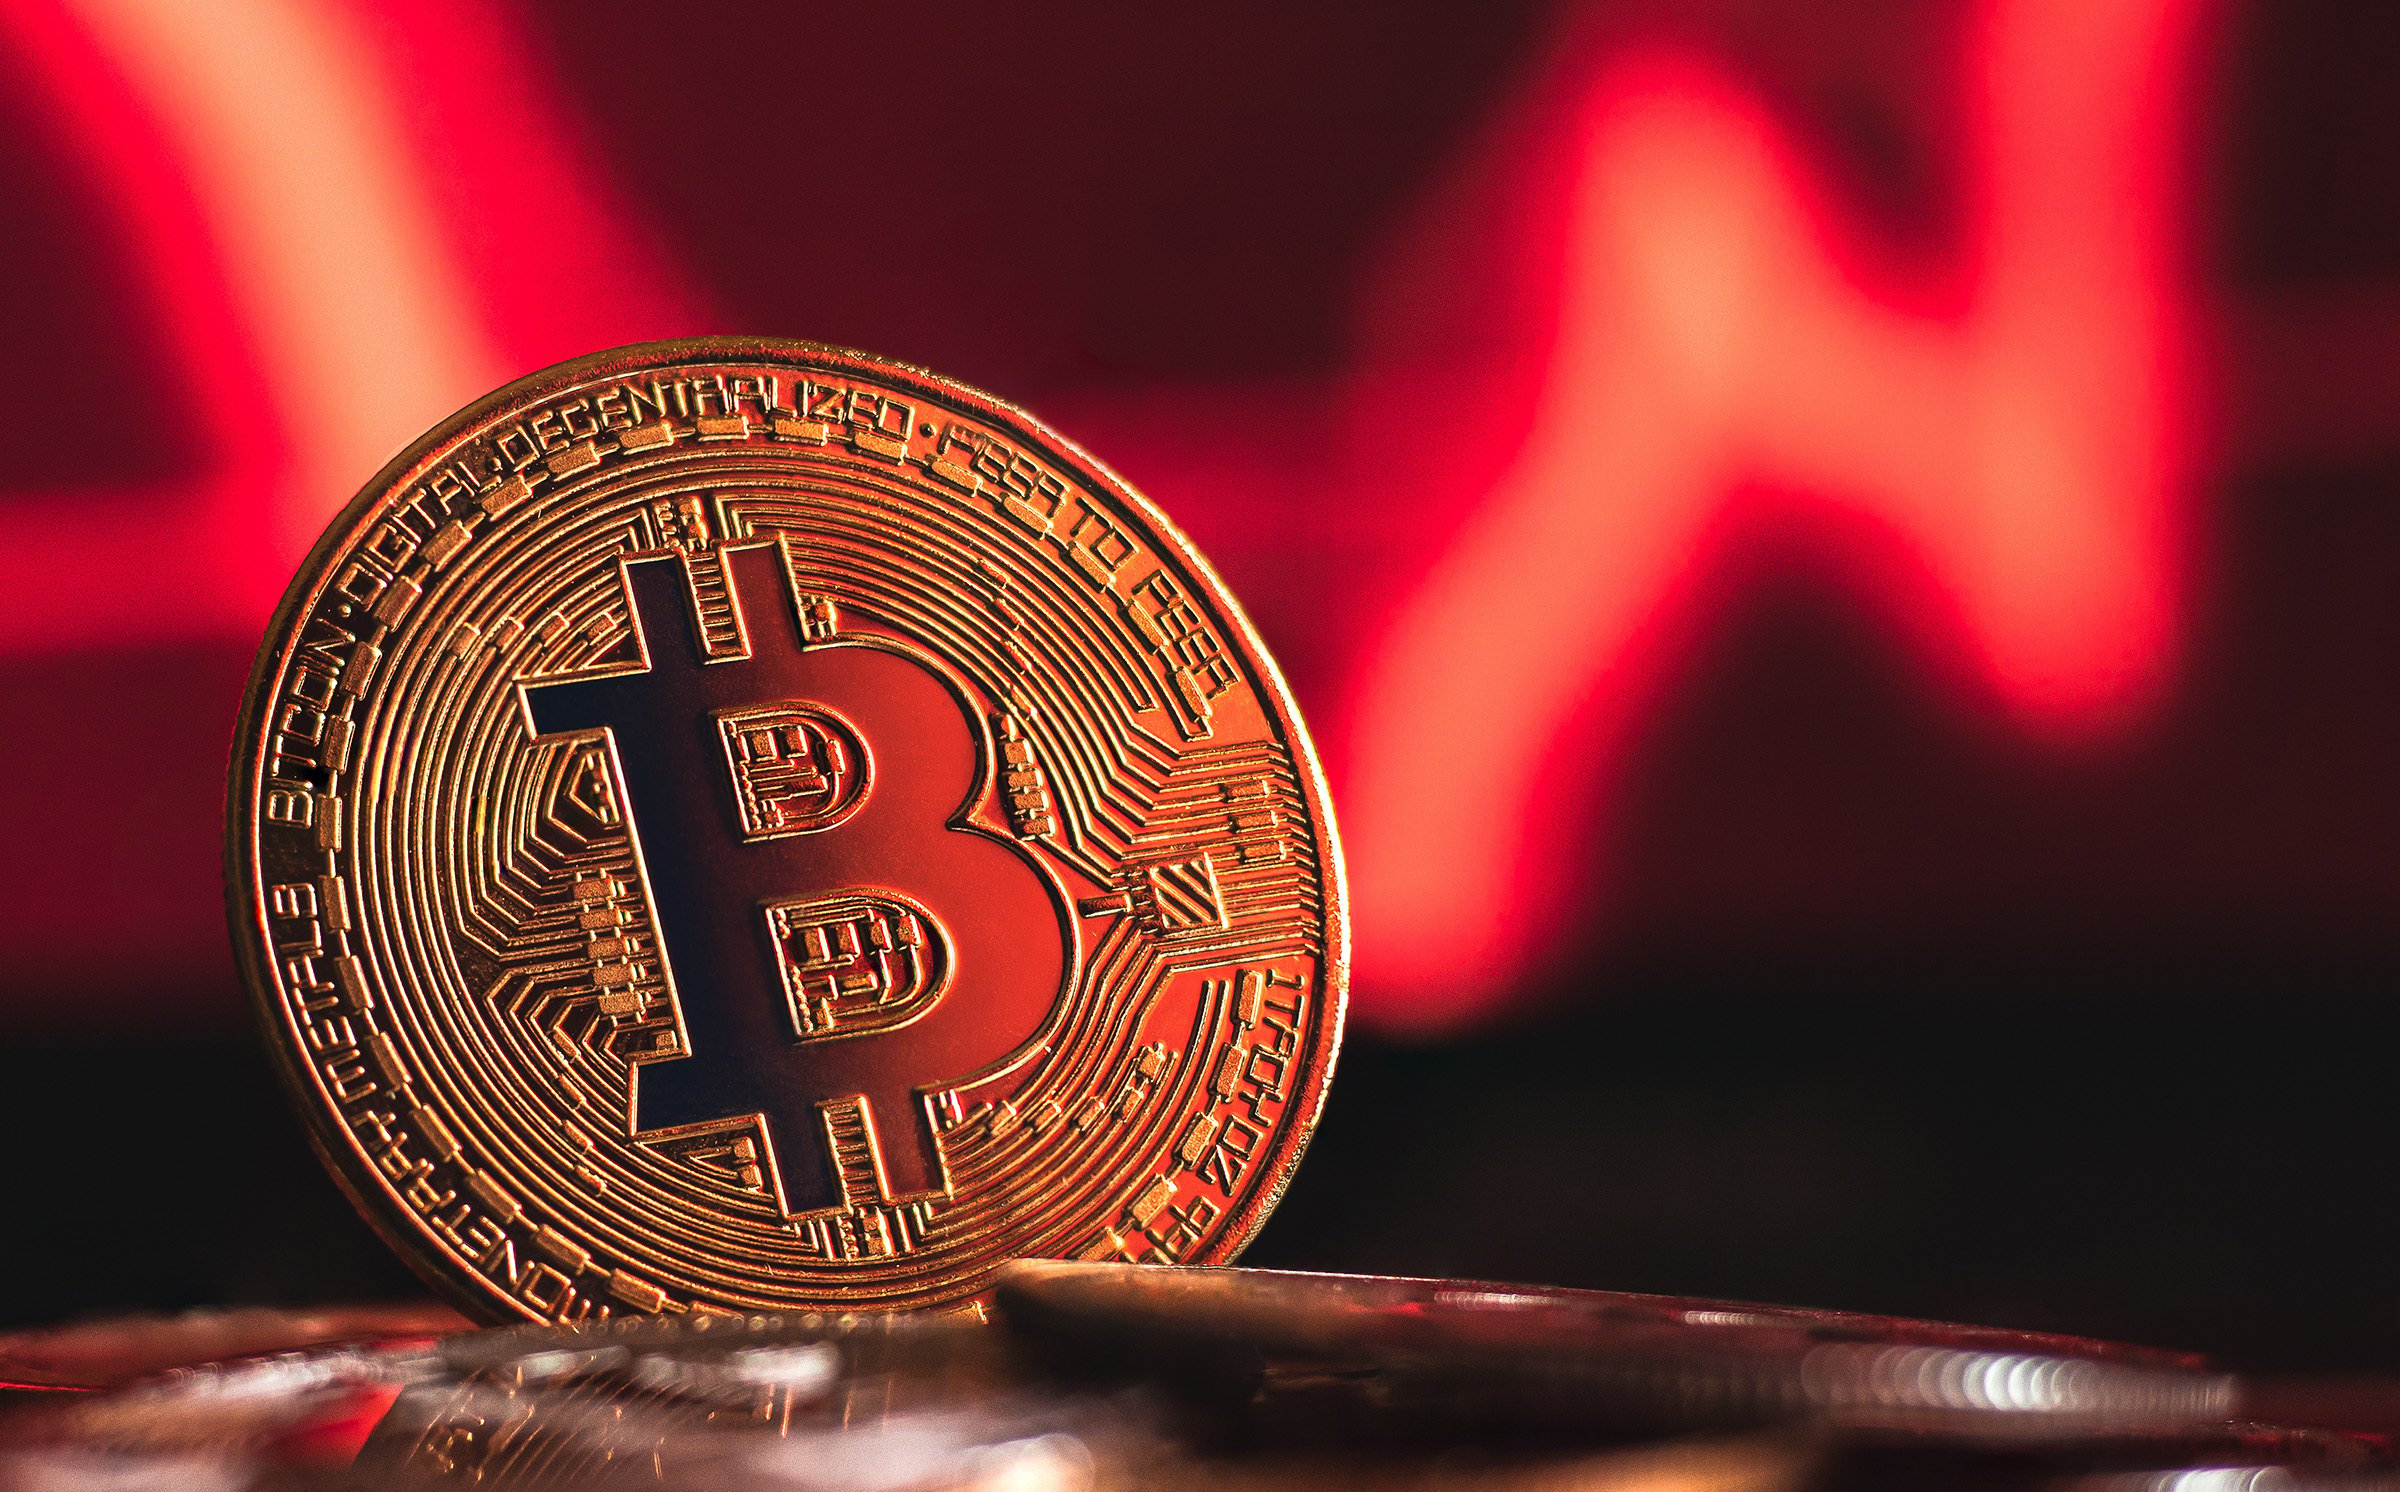 Bitcoin ETFs Shed $563 Million as BlackRock's IBIT Marks First Daily Loss